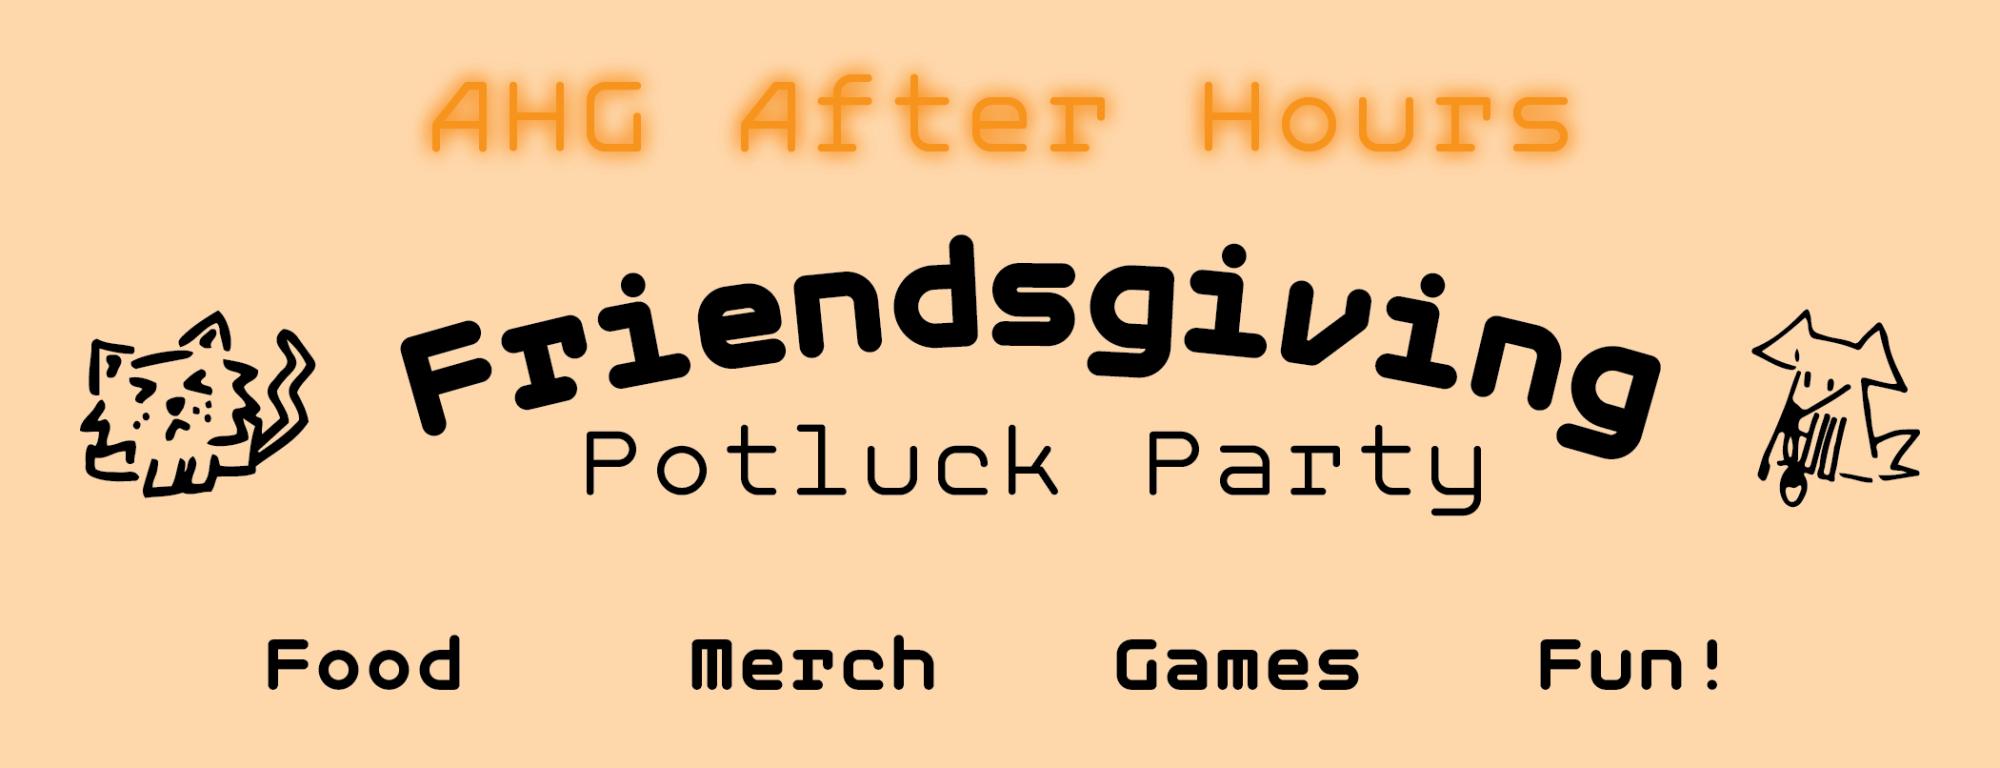 AHG After Hours Friendsgiving Potluck Party including food merch games and fun